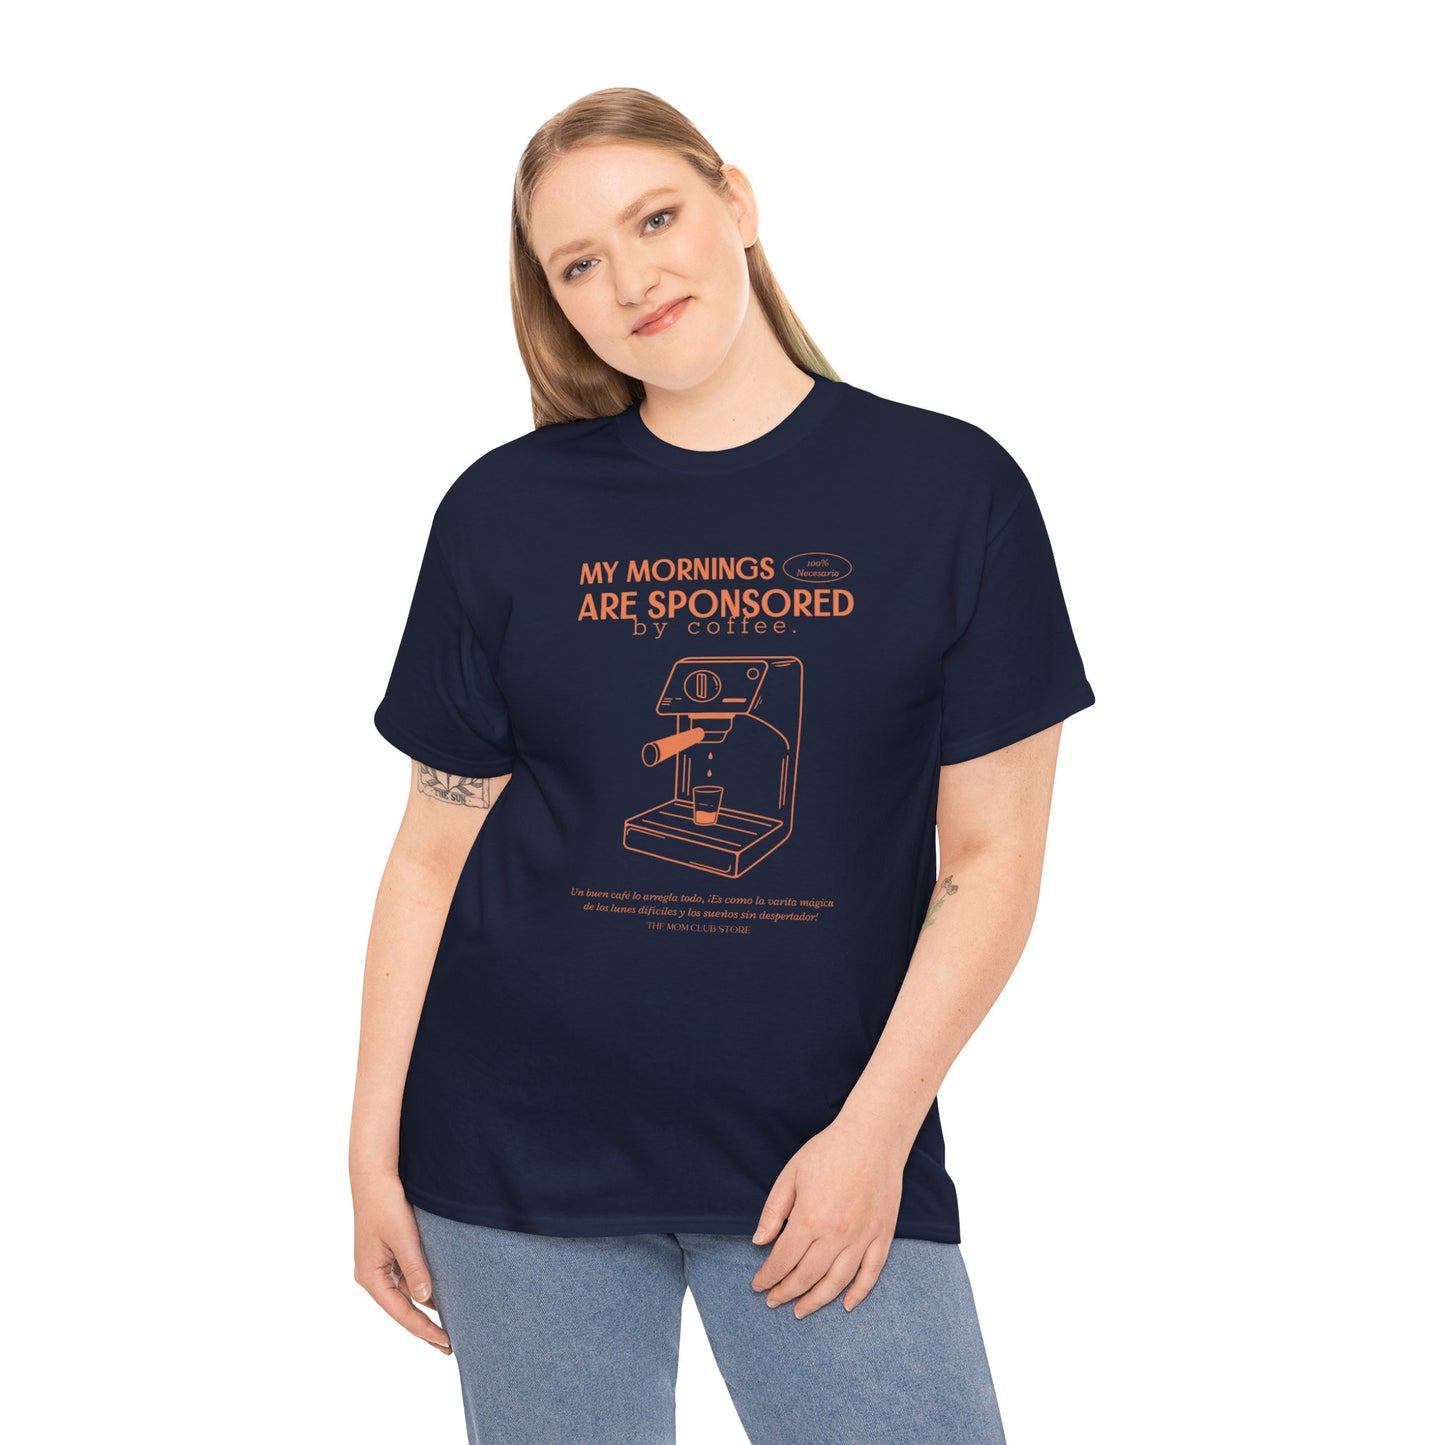 Unisex Short-Sleeve Graphic T-Shirt - my morning are sponsored by coffee- for adults